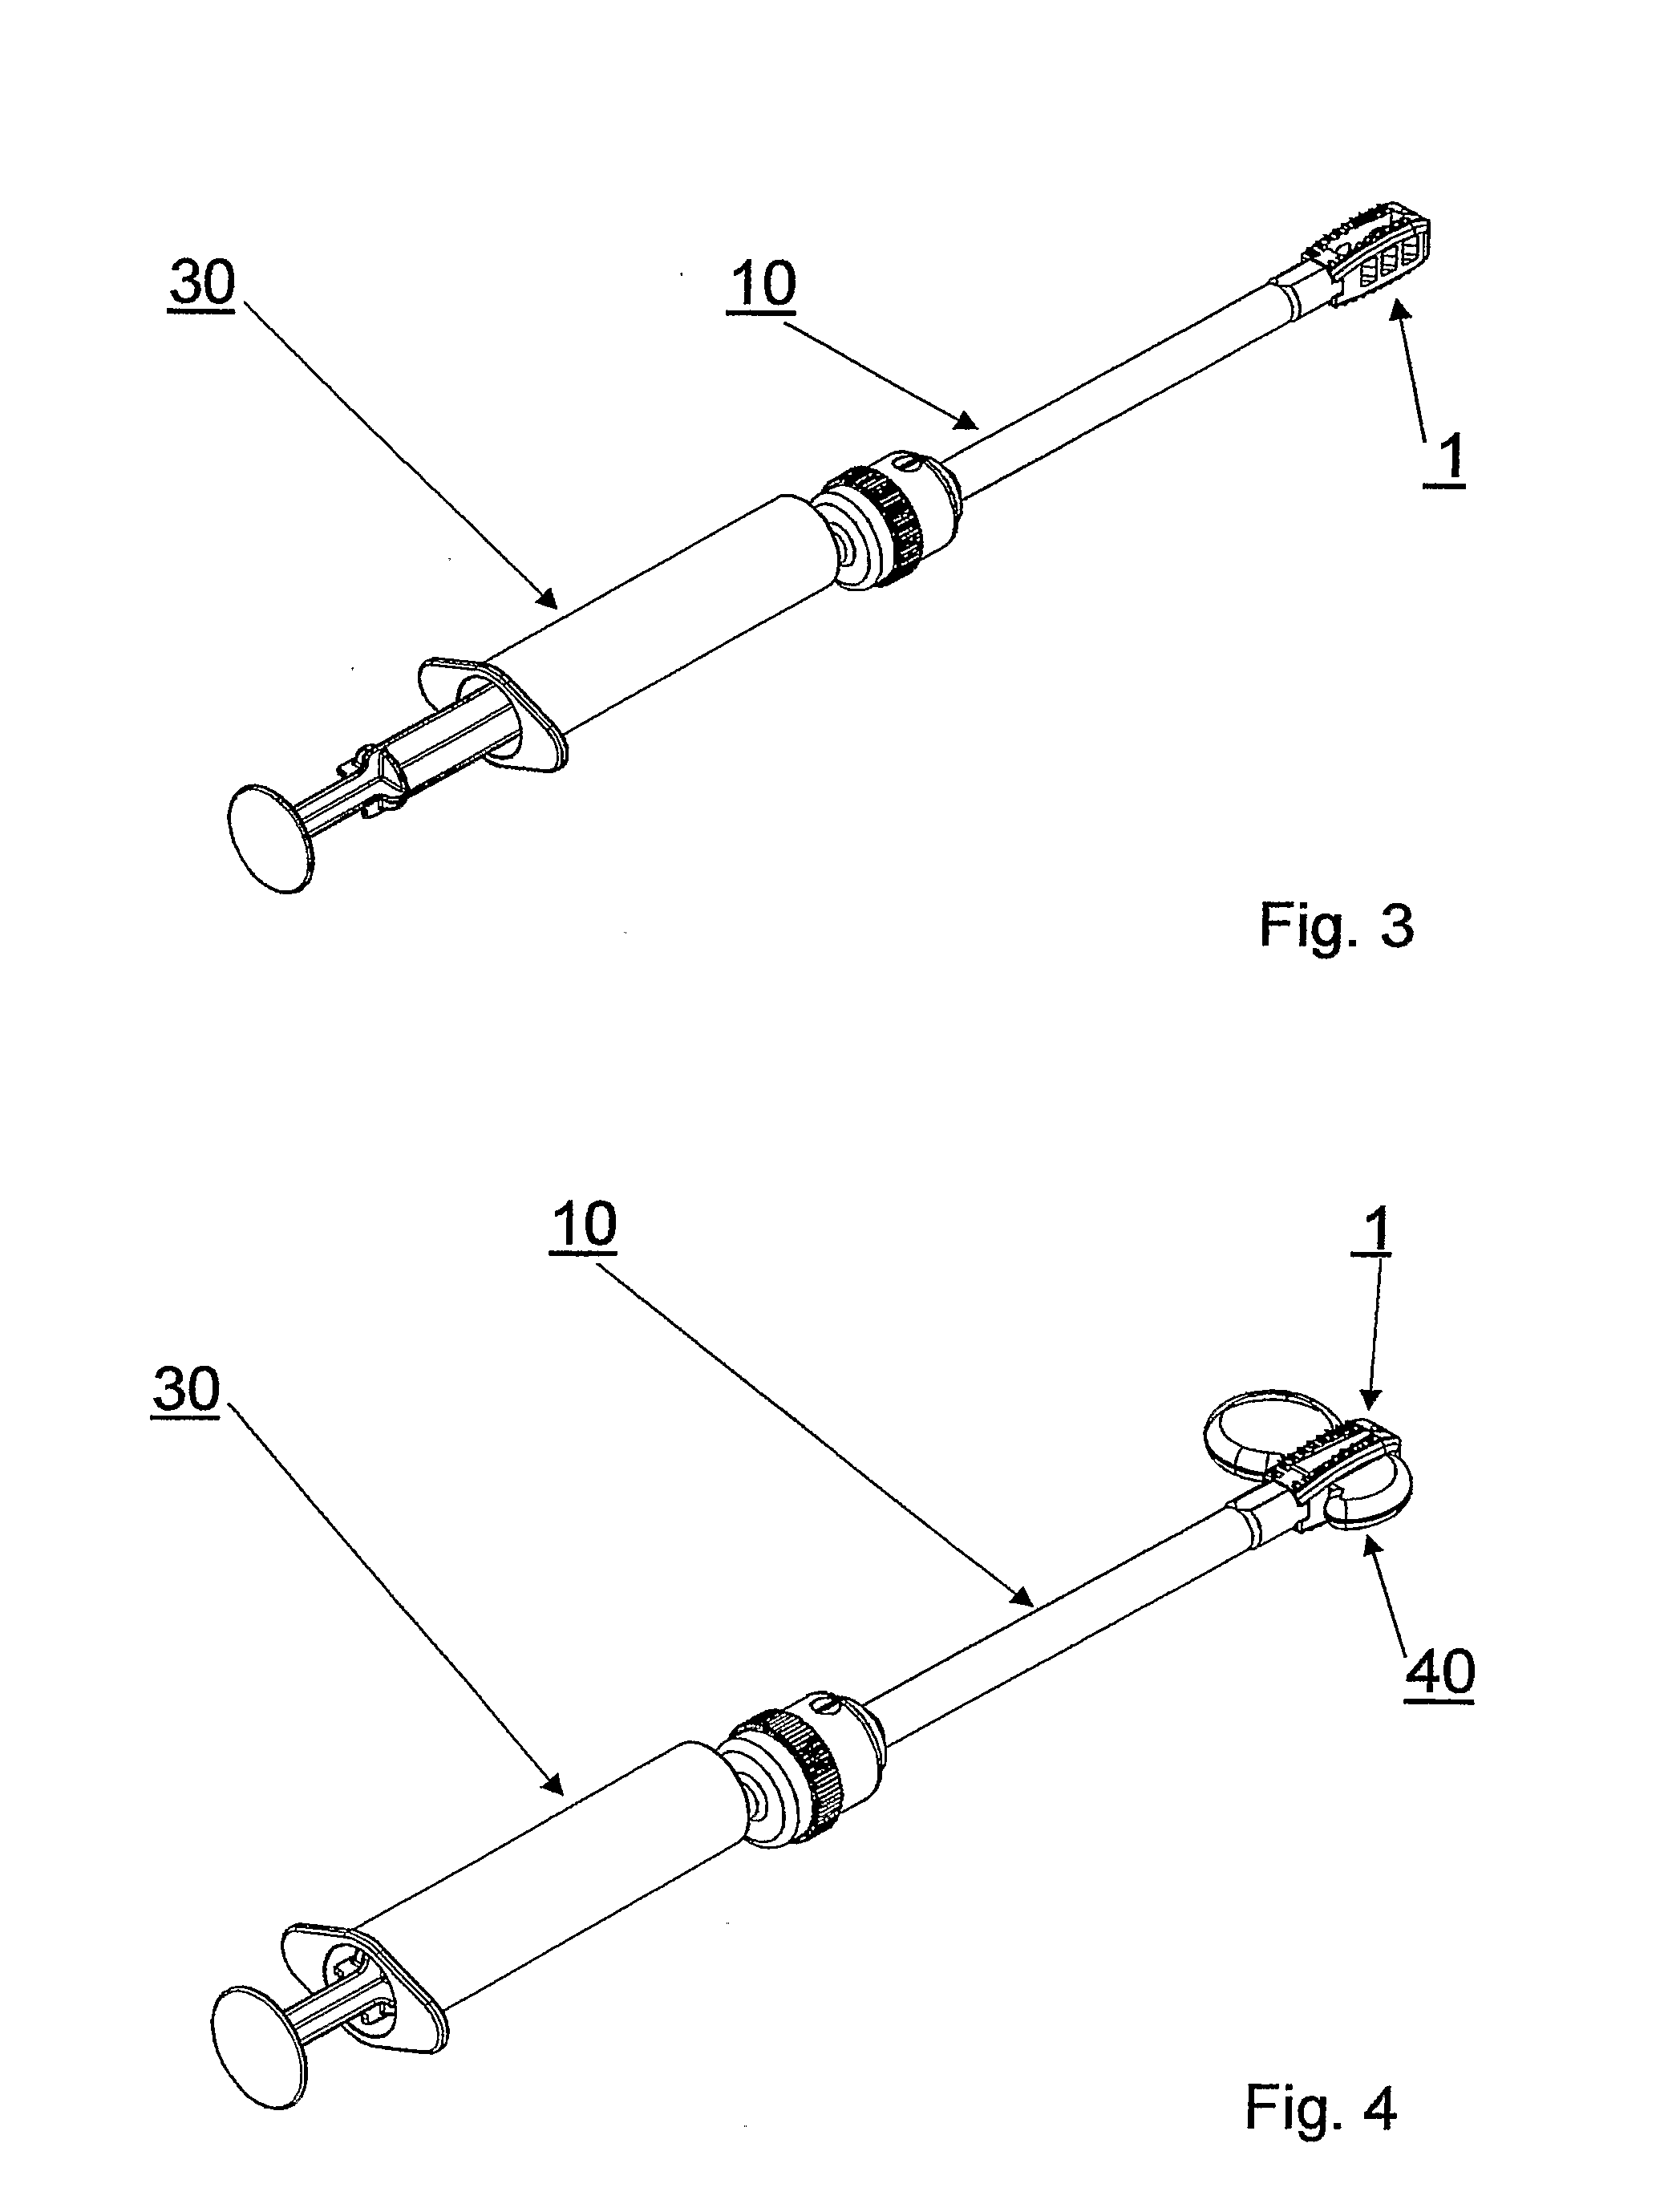 Device for Manipulating and Supplying Hollow or Intervertebral or Disk Prosthesis With Flowable Osteocementum